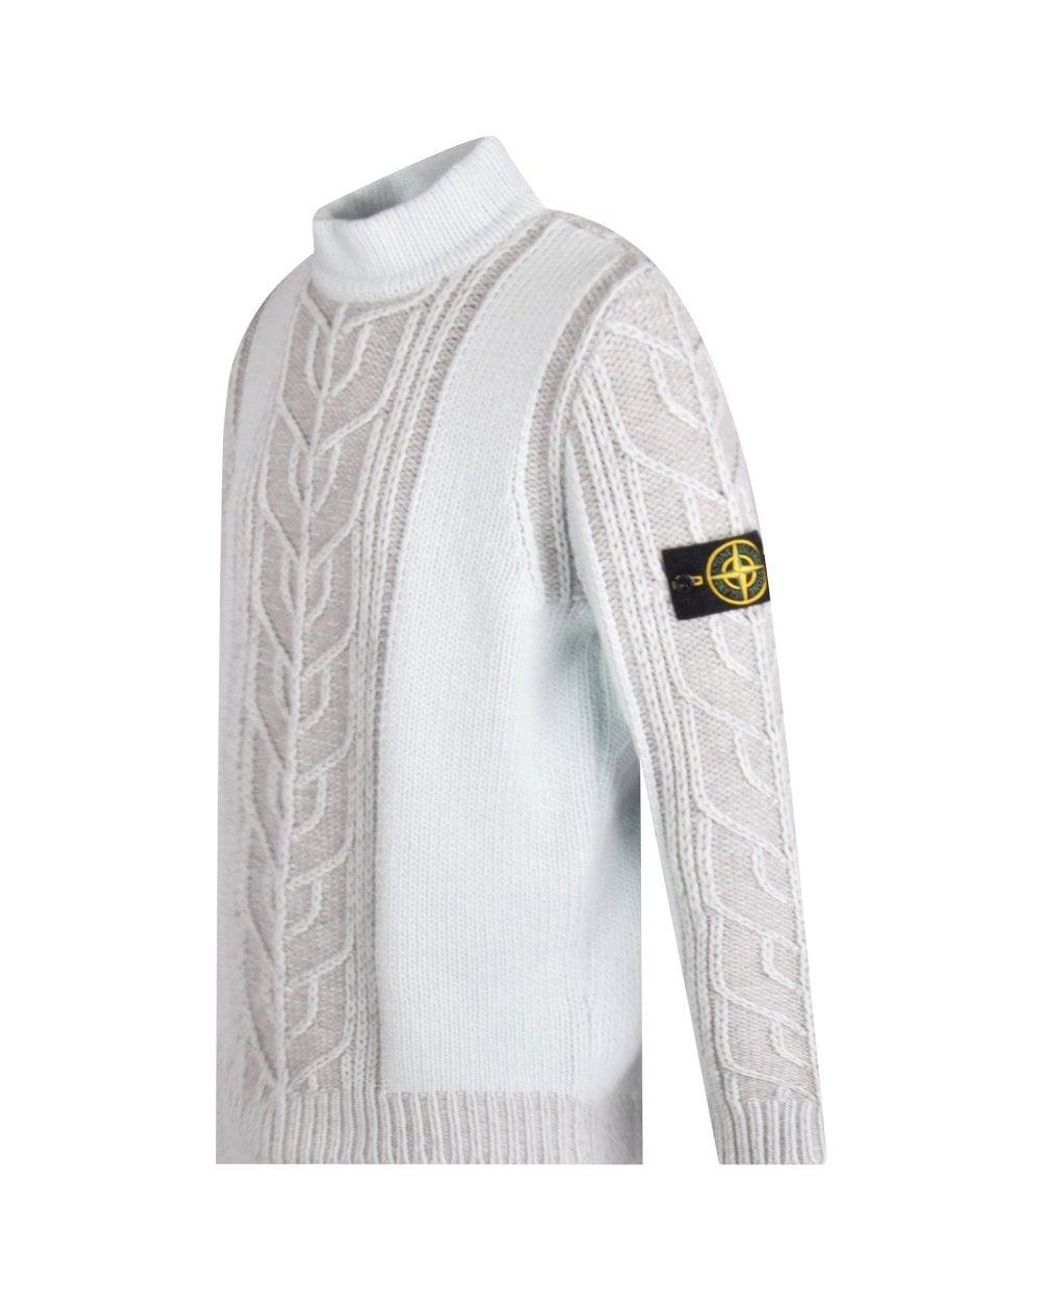 Stone Island Cable Knit Jumper in Green for Men | Lyst